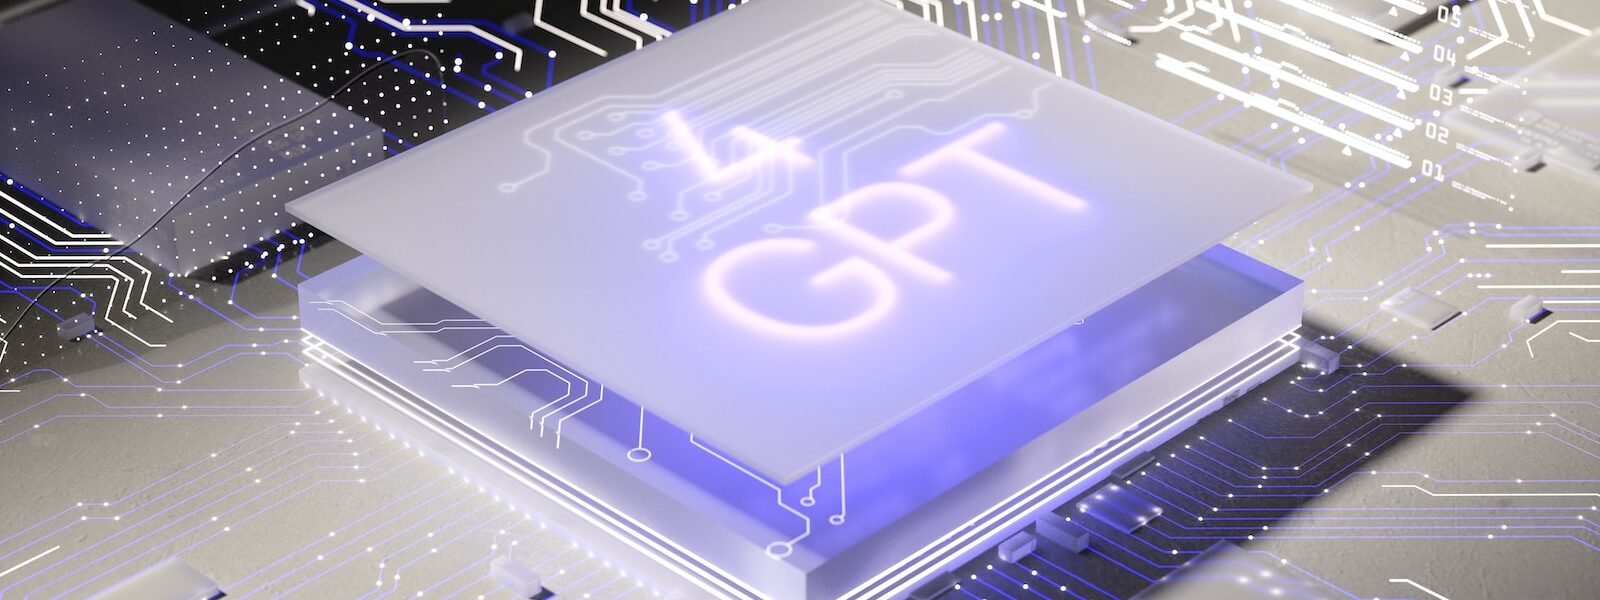 a computer chip with the word gat printed on it